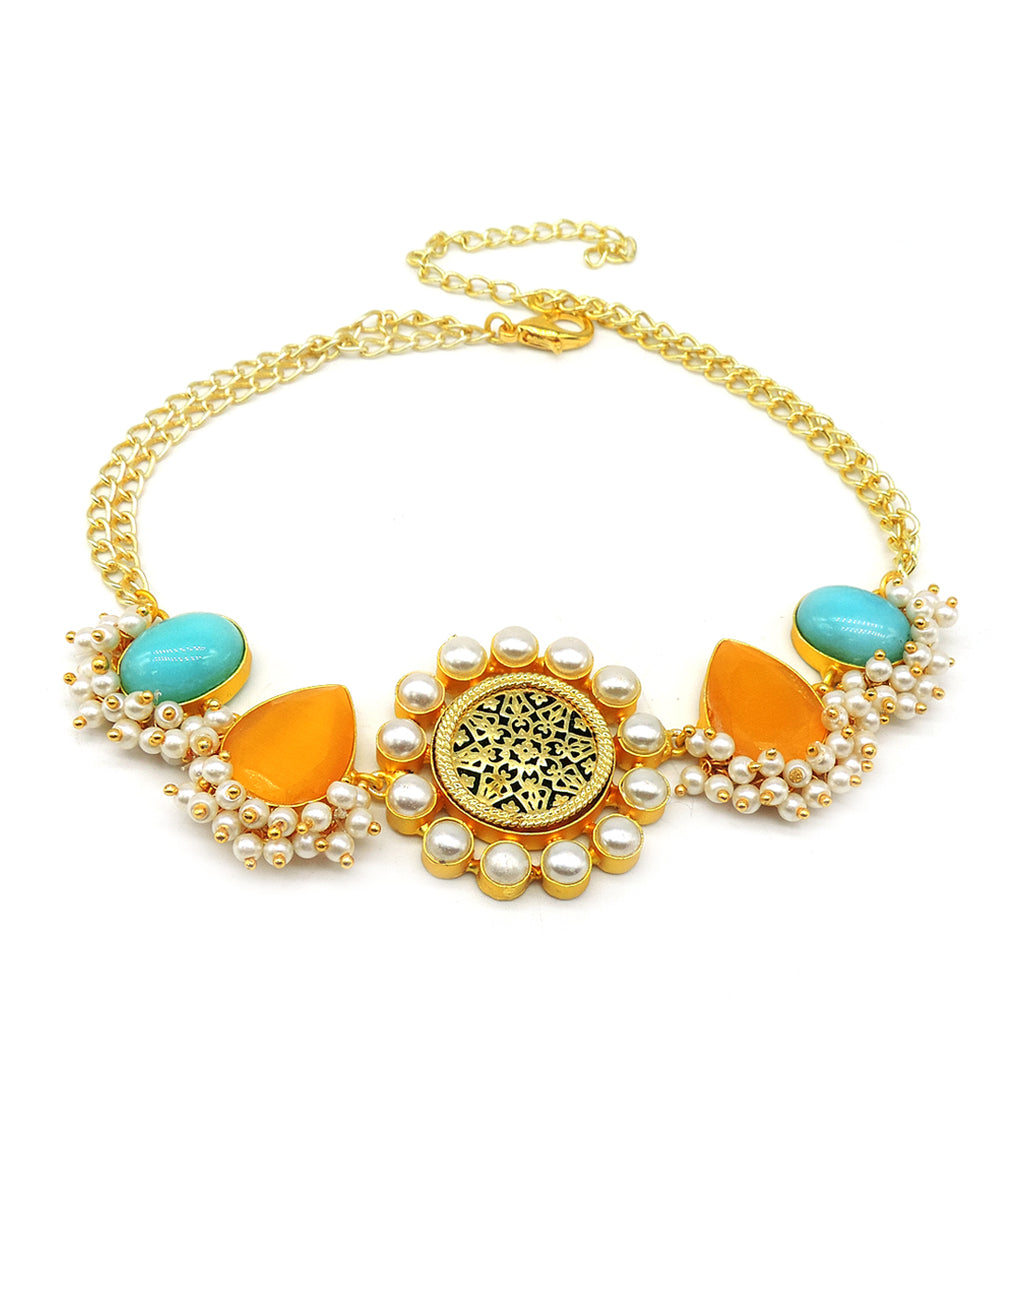 Round Flower Necklace - Statement Necklaces - Gold-Plated & Hypoallergenic Jewellery - Made in India - Dubai Jewellery - Dori